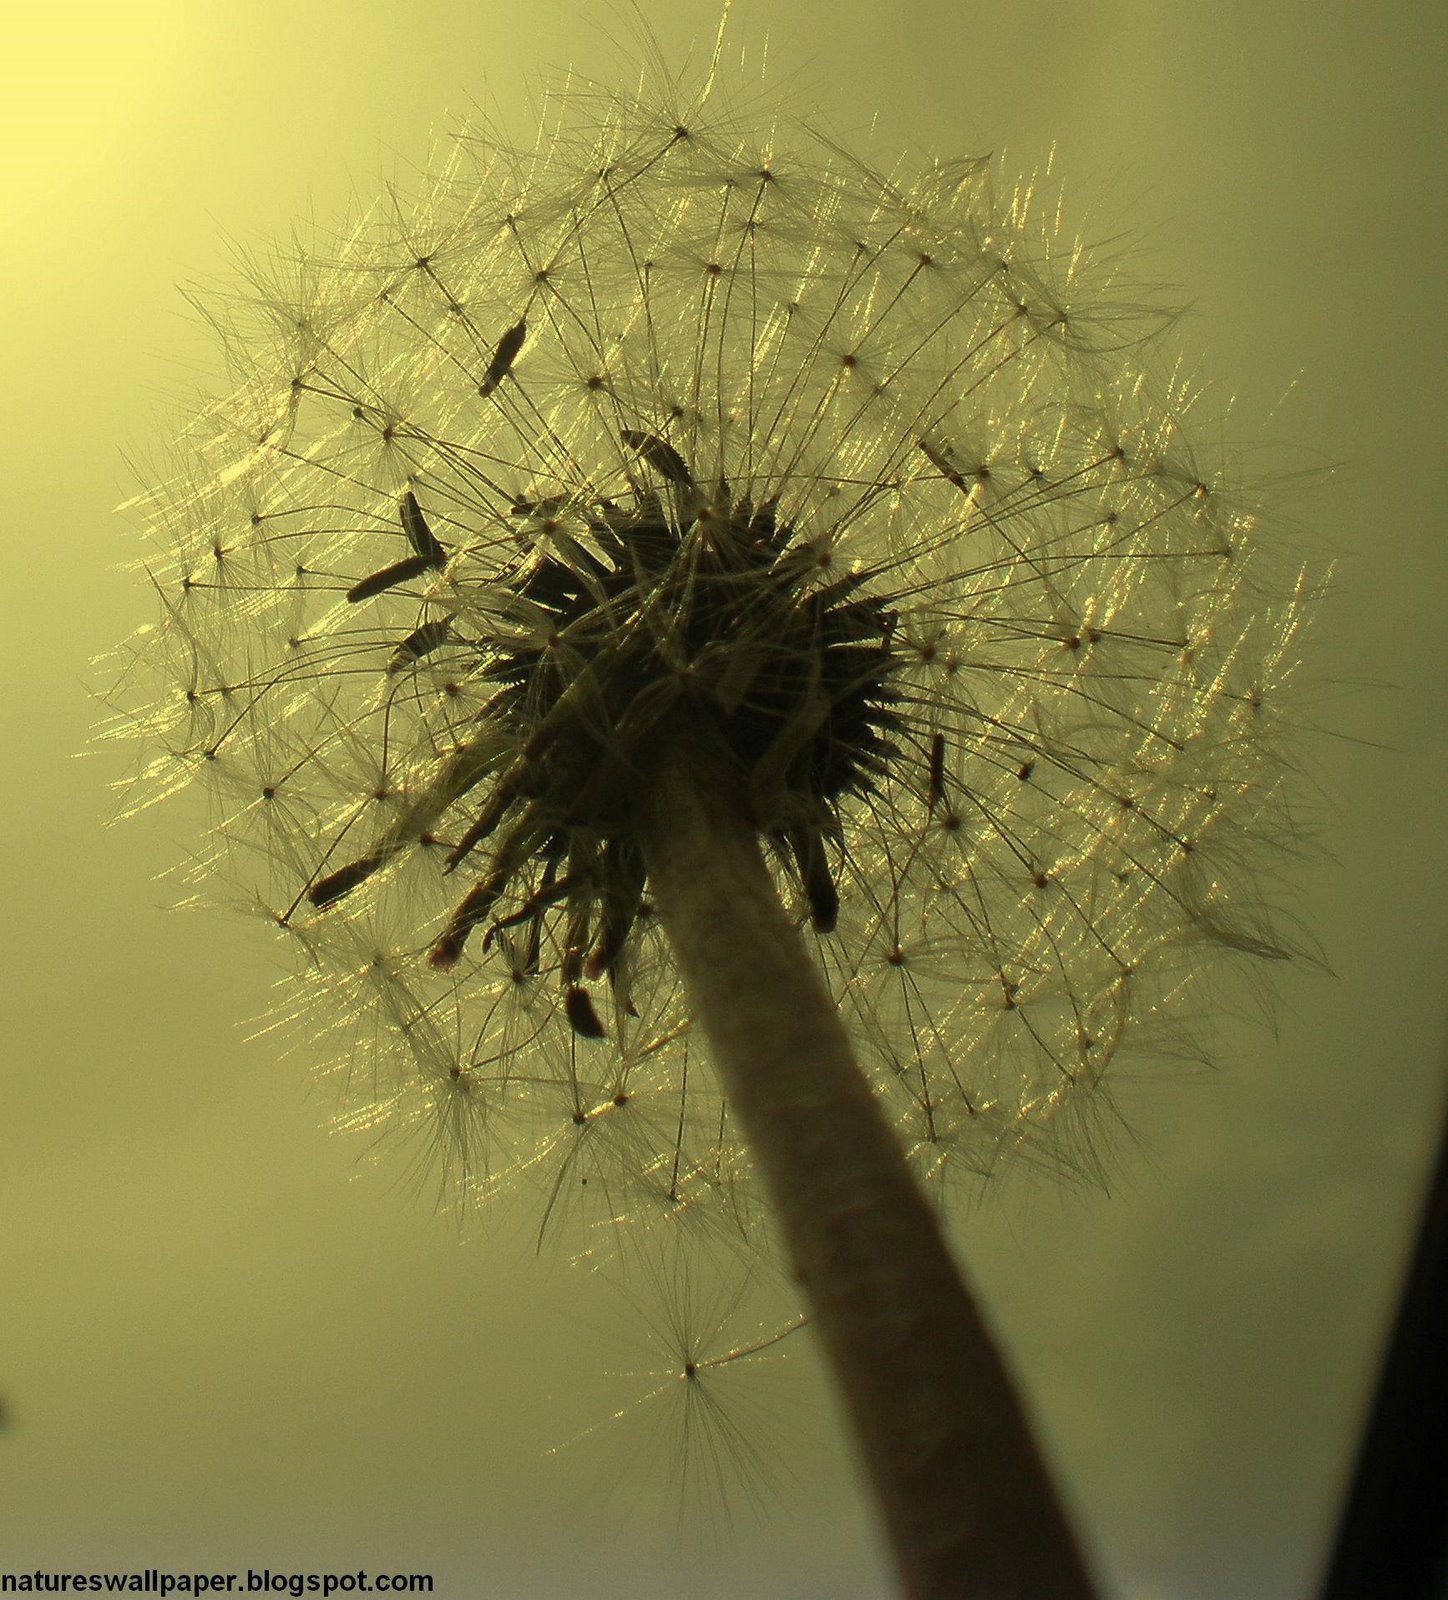 [Dandelion+Seeds+From+The+Ground+View.jpg]